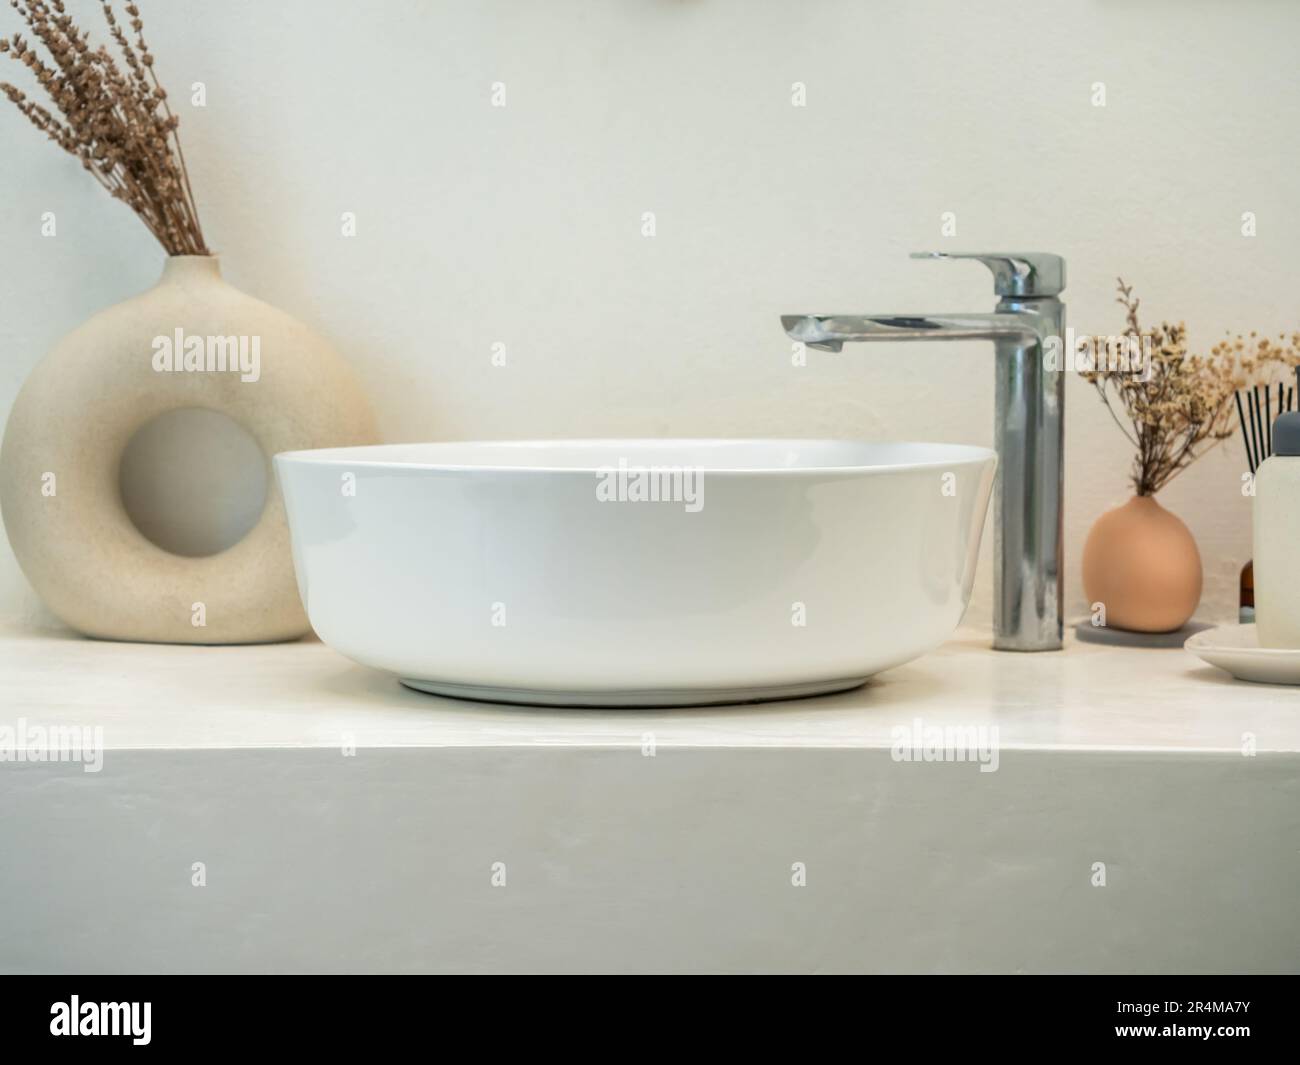 Clean minimal style powder room or bathroom interior with modern round sink basin, faucet, green leaves in modern design pots on marble shelf and whit Stock Photo